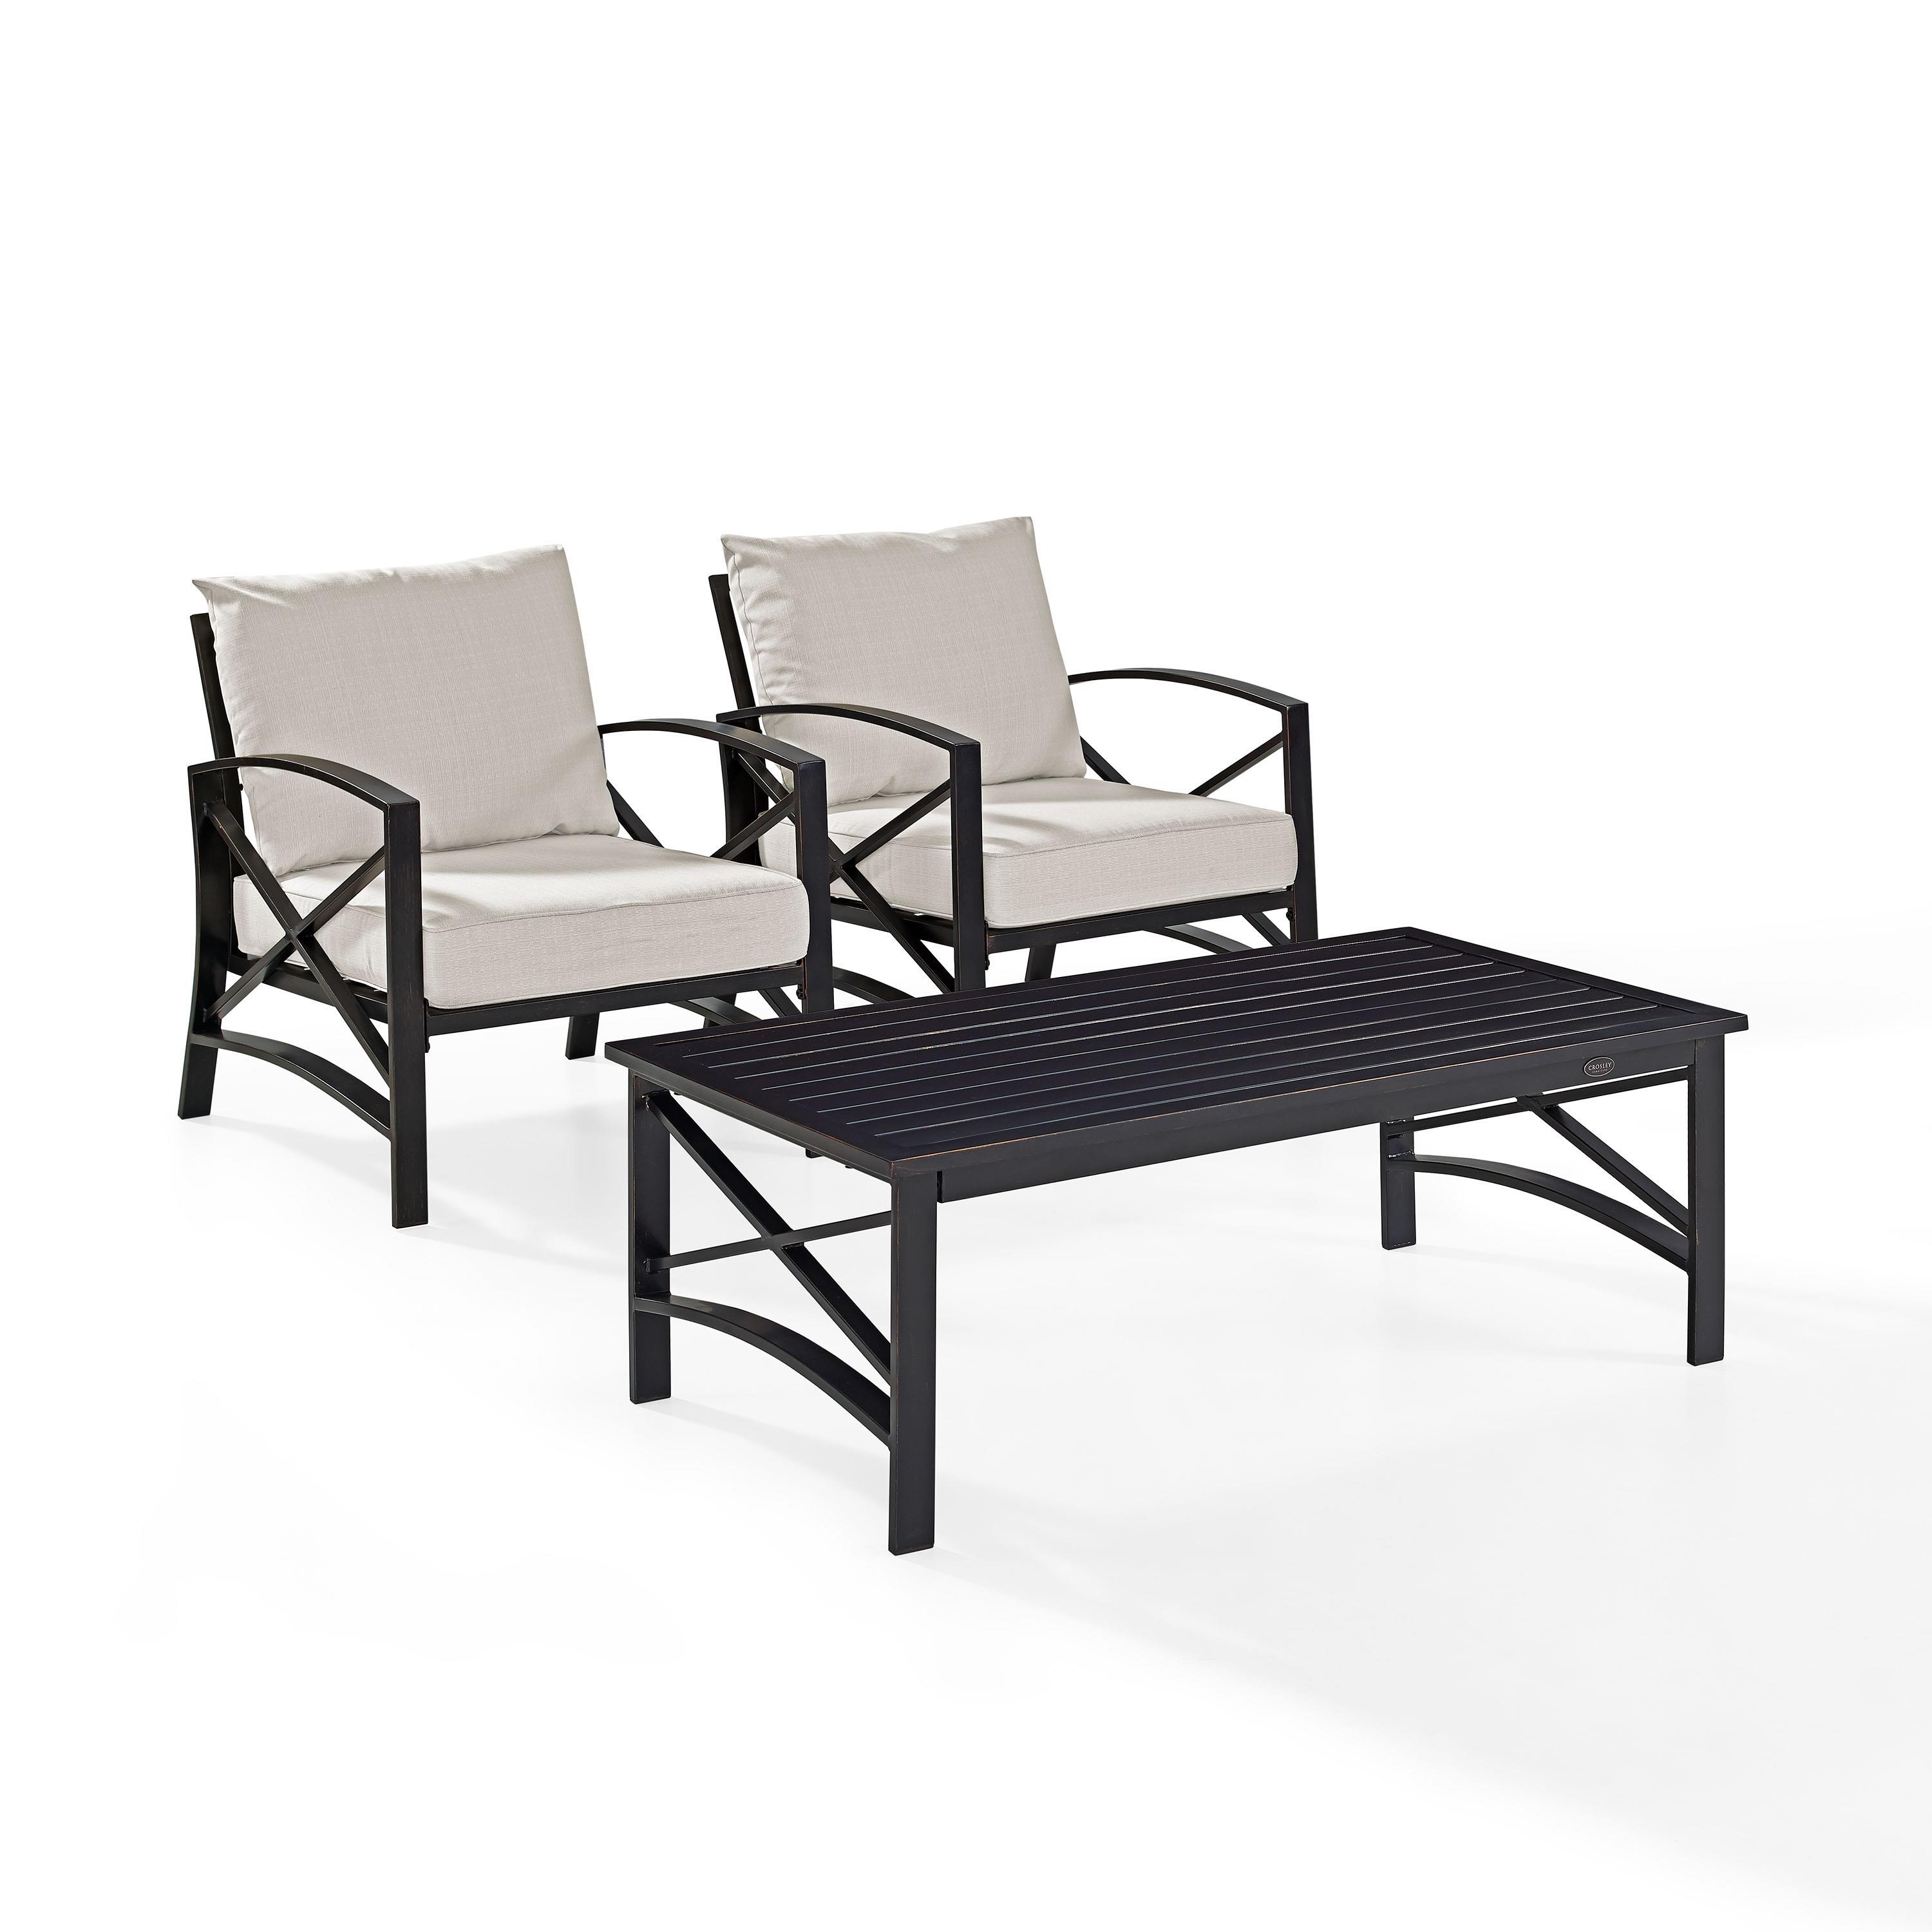 Crosley Furniture Kaplan 3 Pc Outdoor Seating Set With Oatmeal Cushion - Two Outdoor Chairs, Coffee Table - image 2 of 8